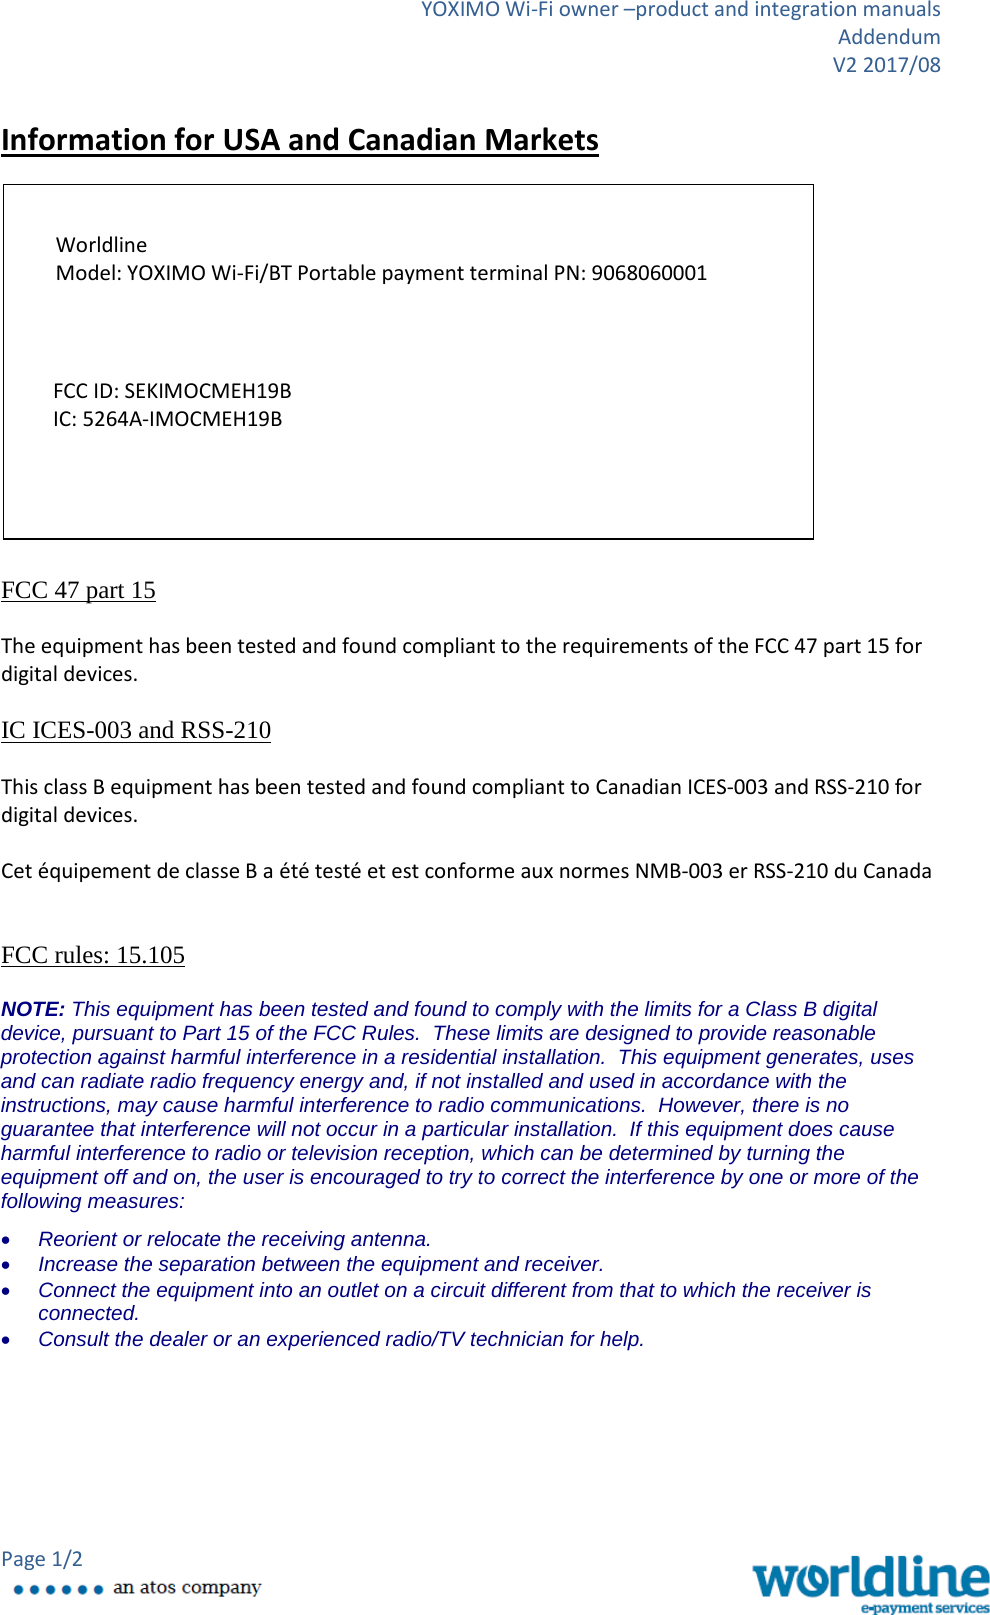 YOXIMO Wi-Fi owner –product and integration manuals Addendum V2 2017/08 Page 1/2    Information for USA and Canadian Markets                FCC 47 part 15  The equipment has been tested and found compliant to the requirements of the FCC 47 part 15 for digital devices.  IC ICES-003 and RSS-210   This class B equipment has been tested and found compliant to Canadian ICES-003 and RSS-210 for digital devices.  Cet équipement de classe B a été testé et est conforme aux normes NMB-003 er RSS-210 du Canada   FCC rules: 15.105  NOTE: This equipment has been tested and found to comply with the limits for a Class B digital device, pursuant to Part 15 of the FCC Rules.  These limits are designed to provide reasonable protection against harmful interference in a residential installation.  This equipment generates, uses and can radiate radio frequency energy and, if not installed and used in accordance with the instructions, may cause harmful interference to radio communications.  However, there is no guarantee that interference will not occur in a particular installation.  If this equipment does cause harmful interference to radio or television reception, which can be determined by turning the equipment off and on, the user is encouraged to try to correct the interference by one or more of the following measures: • Reorient or relocate the receiving antenna. • Increase the separation between the equipment and receiver. • Connect the equipment into an outlet on a circuit different from that to which the receiver is connected. • Consult the dealer or an experienced radio/TV technician for help.          Worldline  Model: YOXIMO Wi-Fi/BT Portable payment terminal PN: 9068060001 FCC ID: SEKIMOCMEH19B IC: 5264A-IMOCMEH19B  